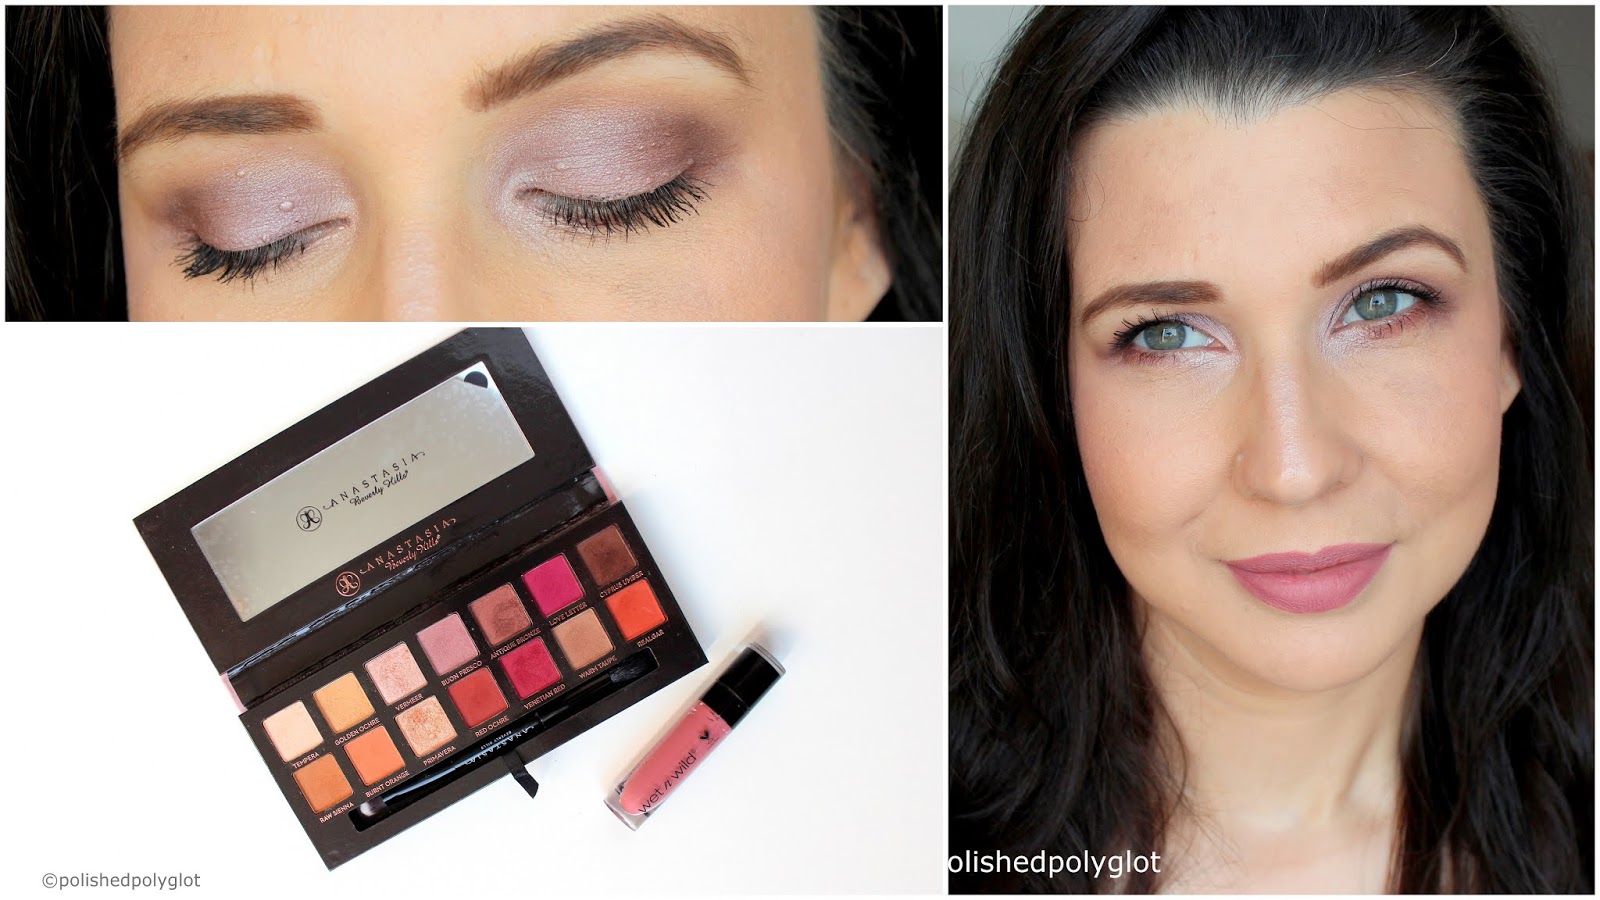 Makeup │ Soft look in Dusty Rose and Brown for the Monday Shadow